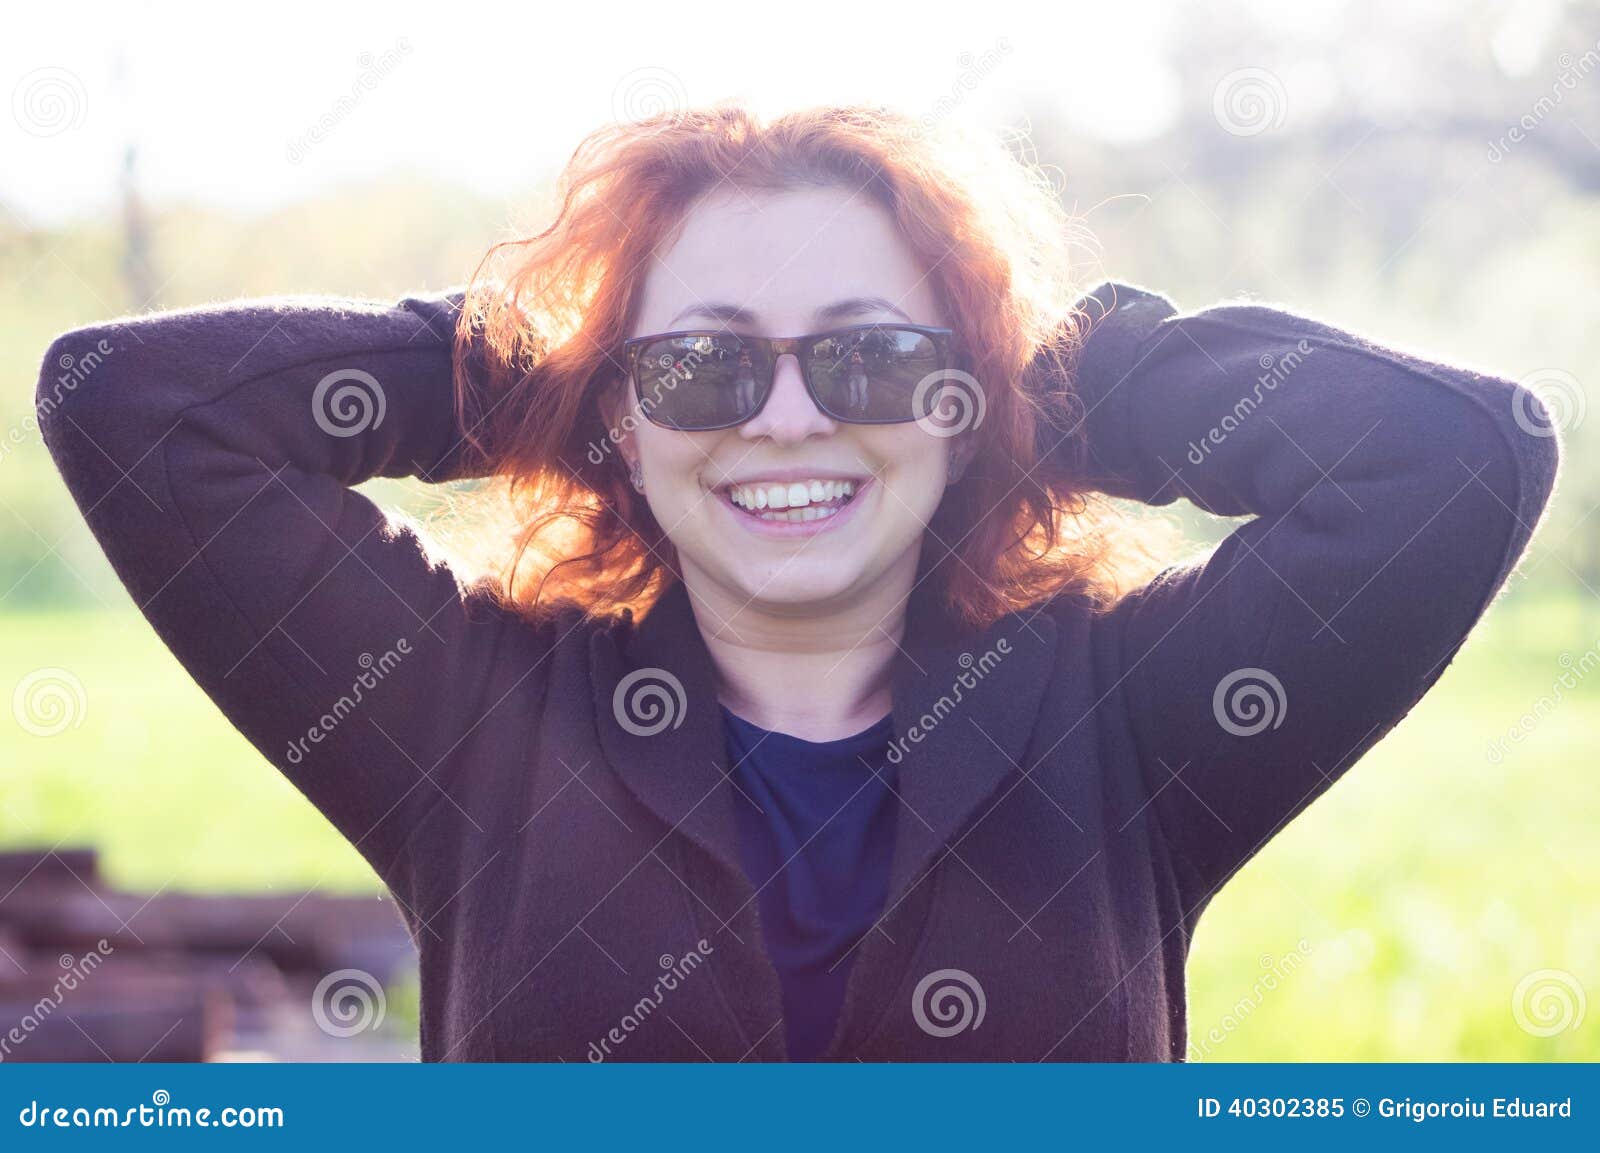 young woman feeling happy and laughing